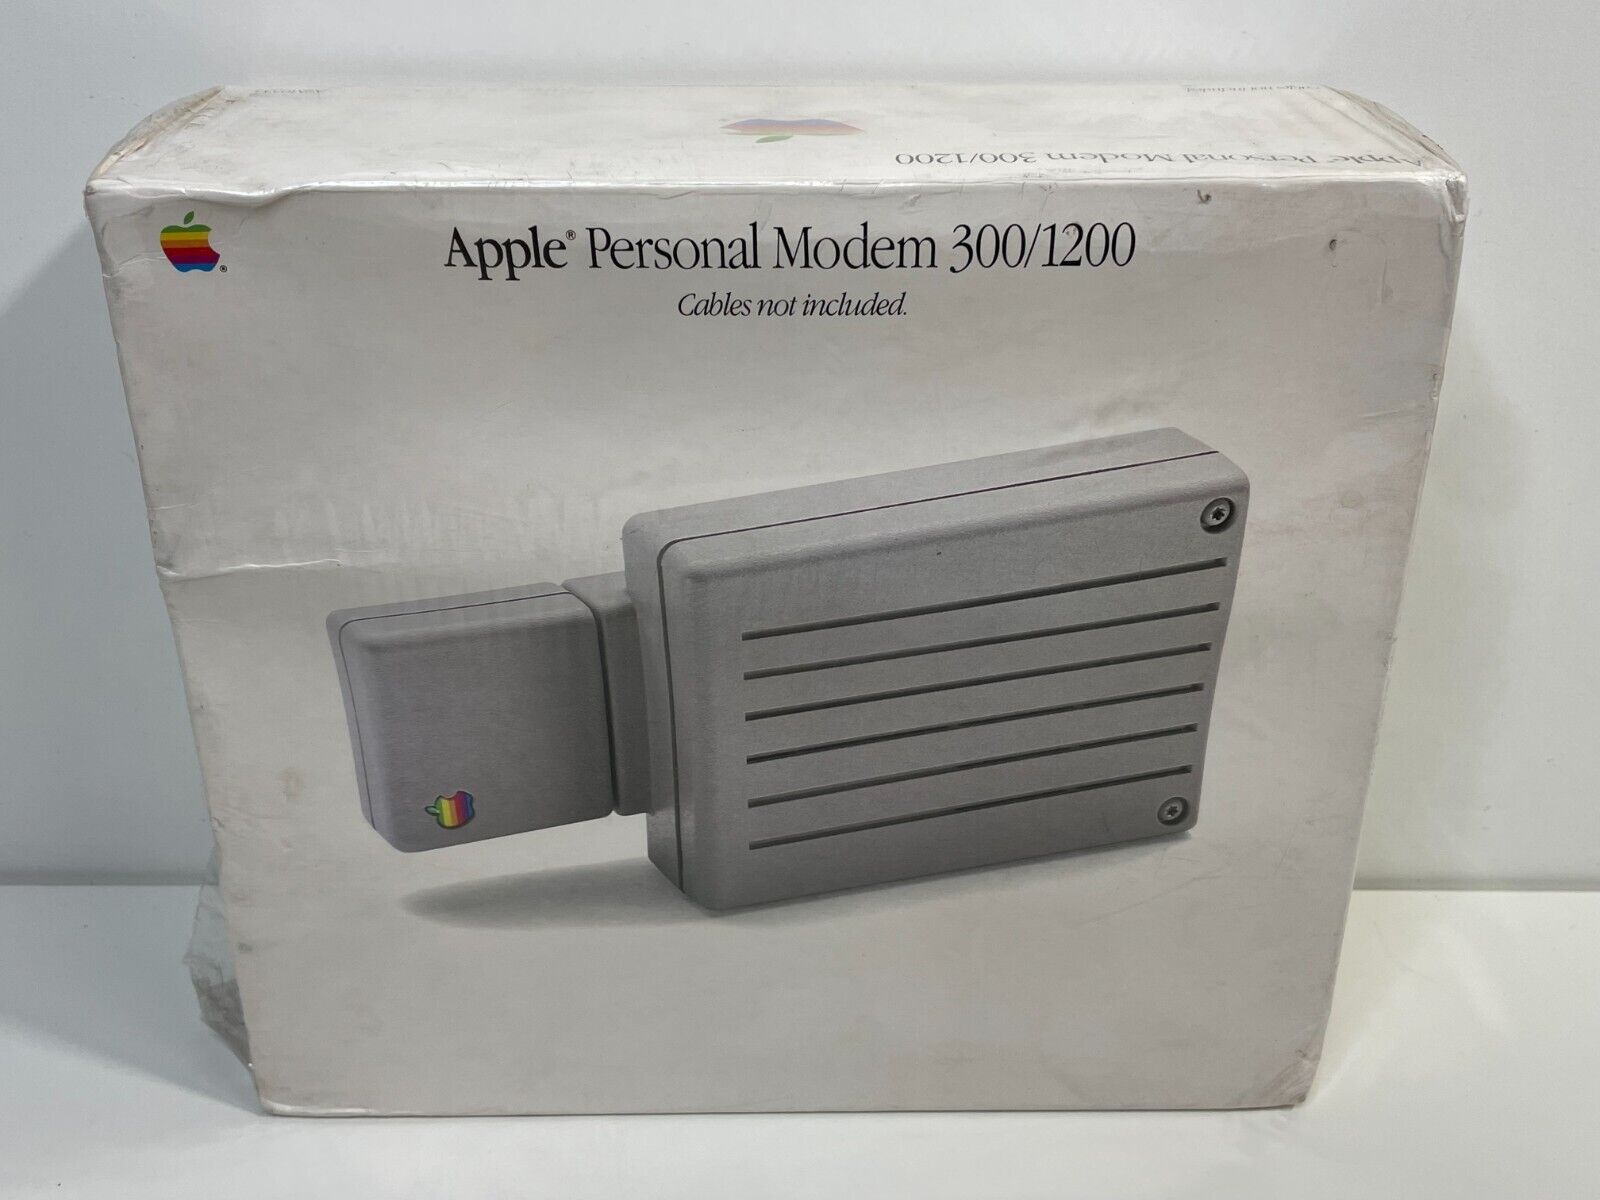 Apple Personal Modem 300 / 1200 Vintage 1986 A9M0334 - NEW, SEALED